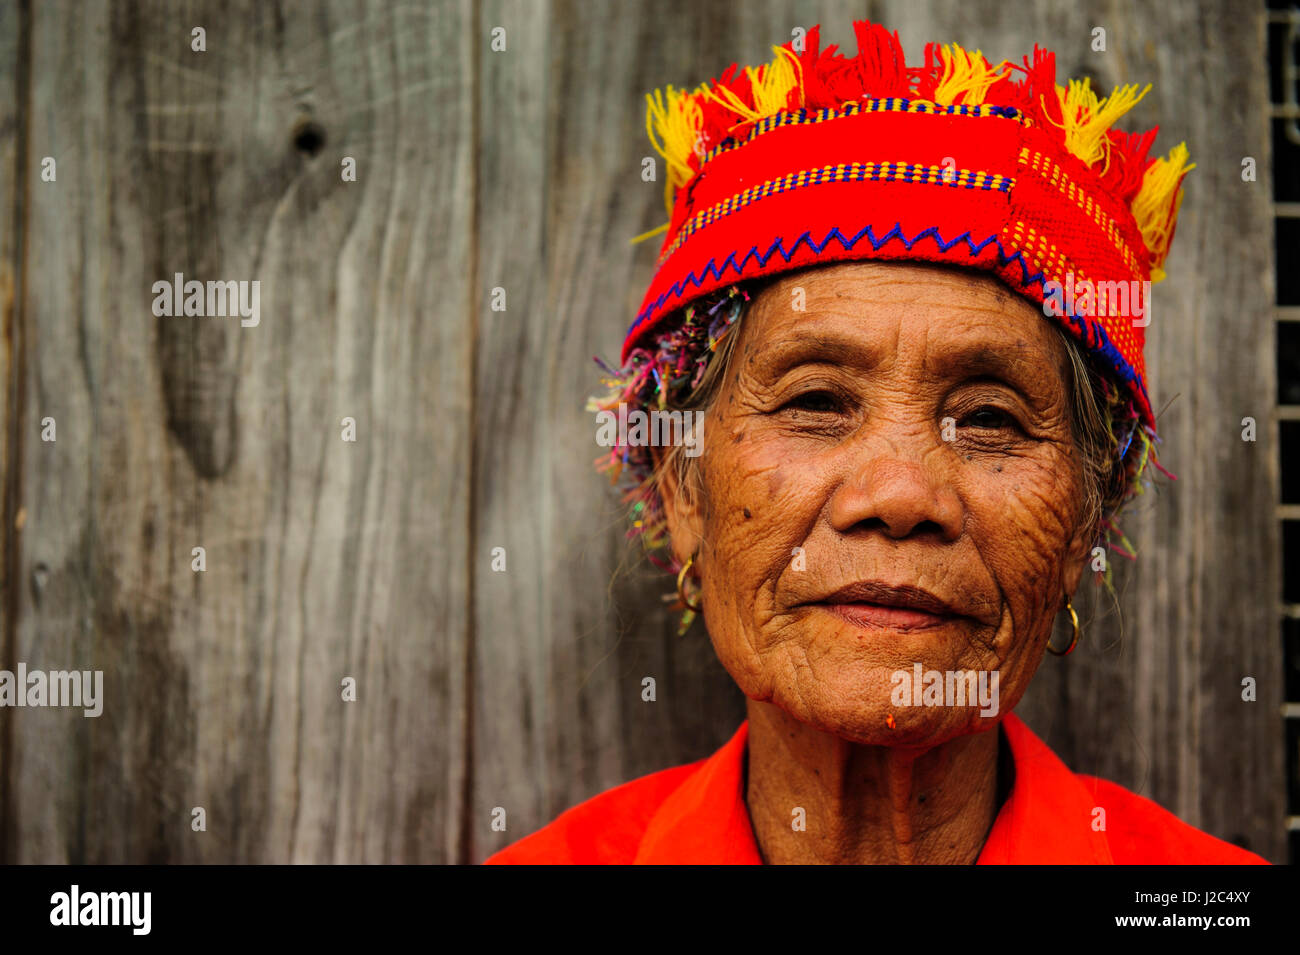 Traditional Dressed Ifugao Woman Sitting In The Unesco World Heritage Site Rice Terraces Of